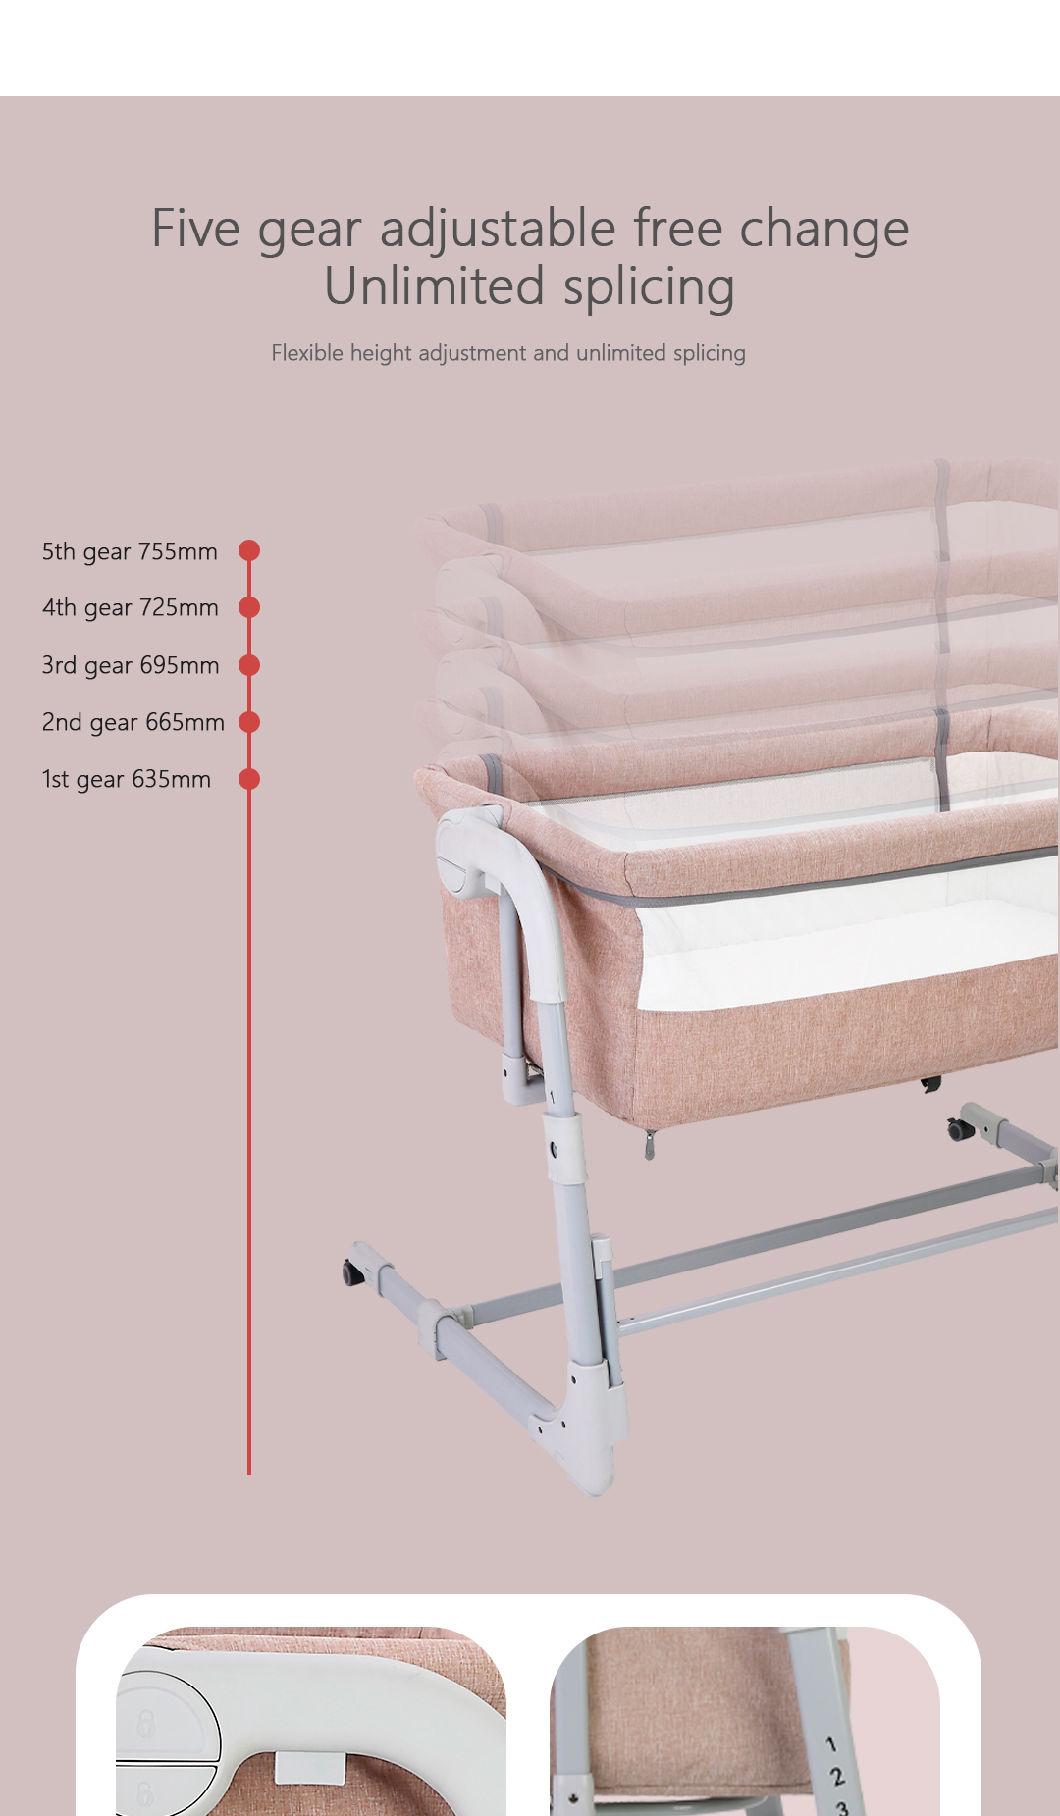 New Products Multifunction Crib Cot Baby Bed with Mature Manufacturing Process